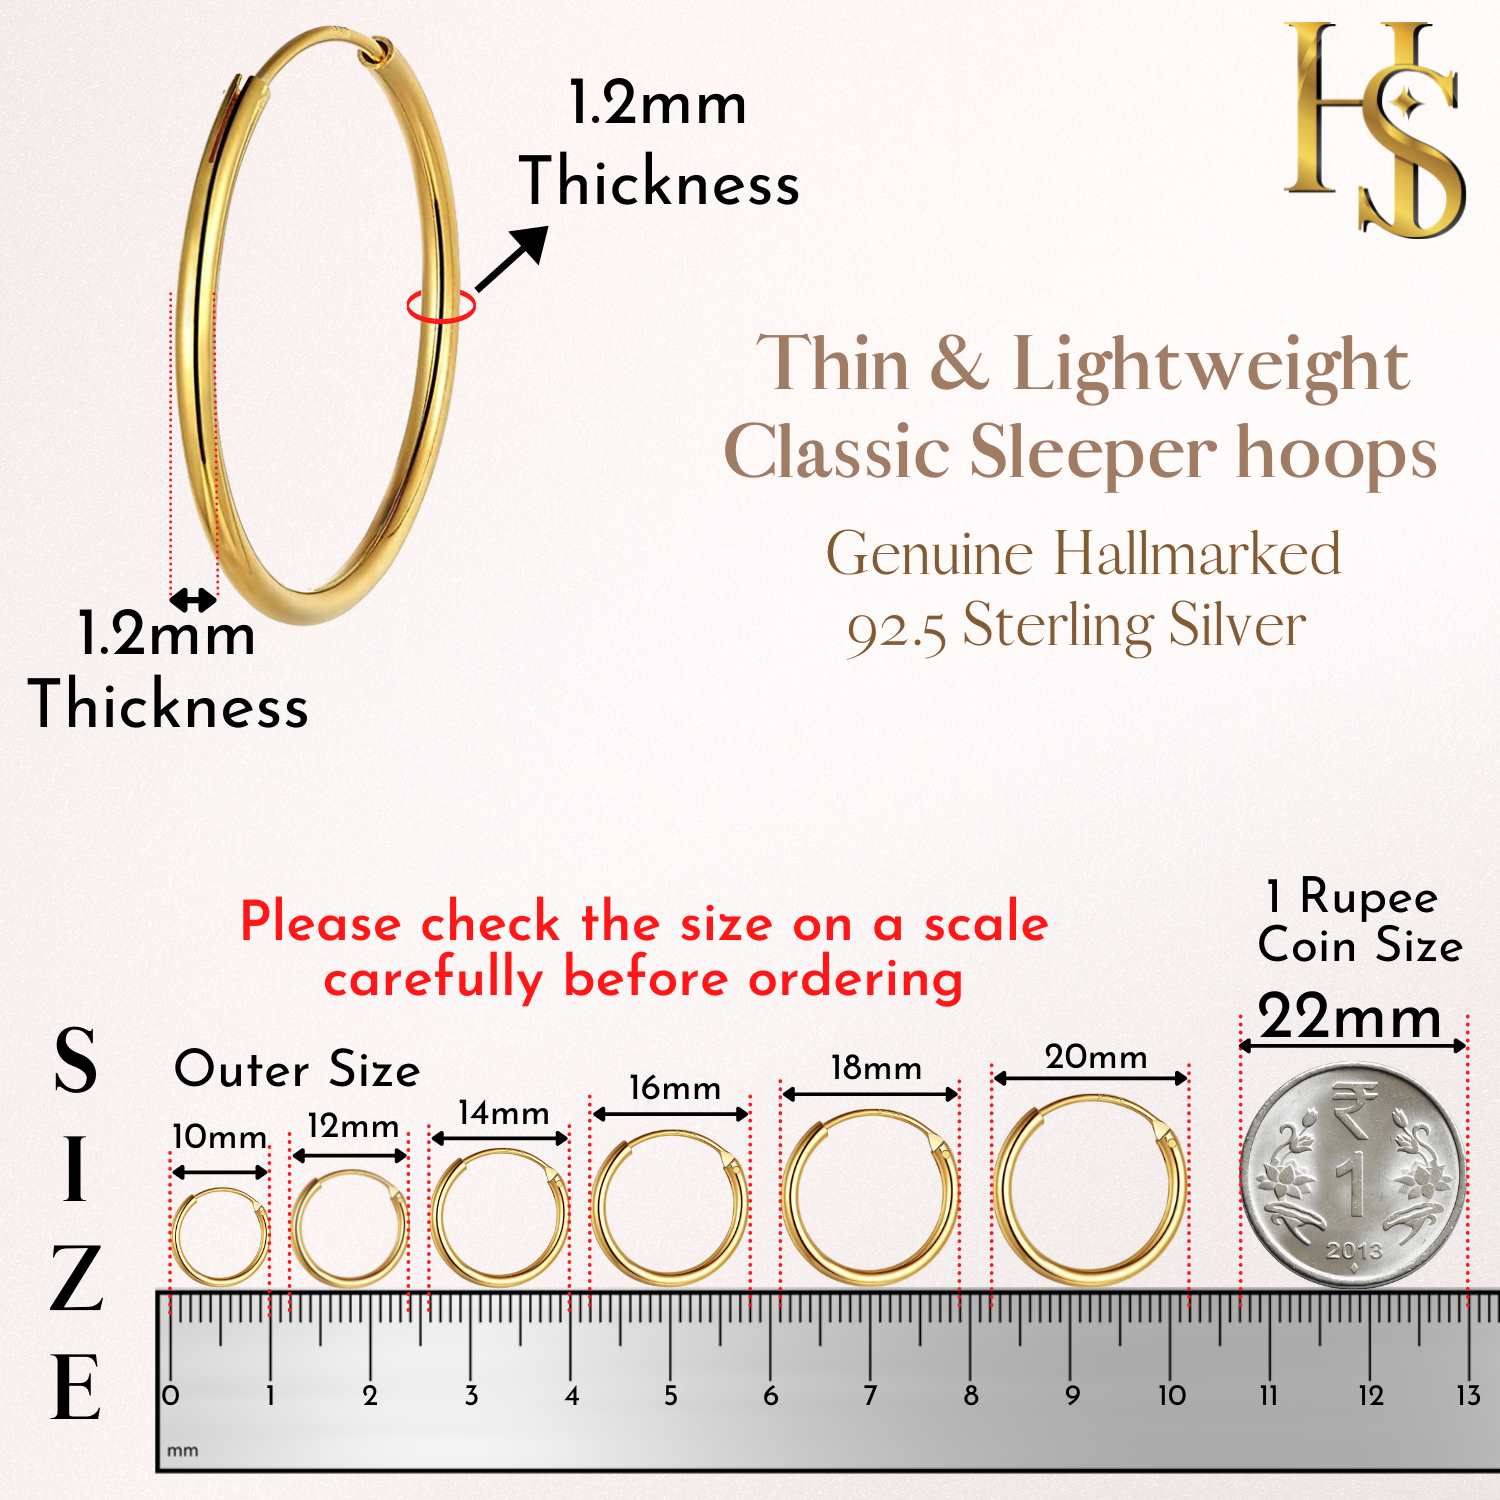 Classic Gold Hoop Earrings in 92.5 Silver - 1.2mm Thickness - Small Si –  HighSpark